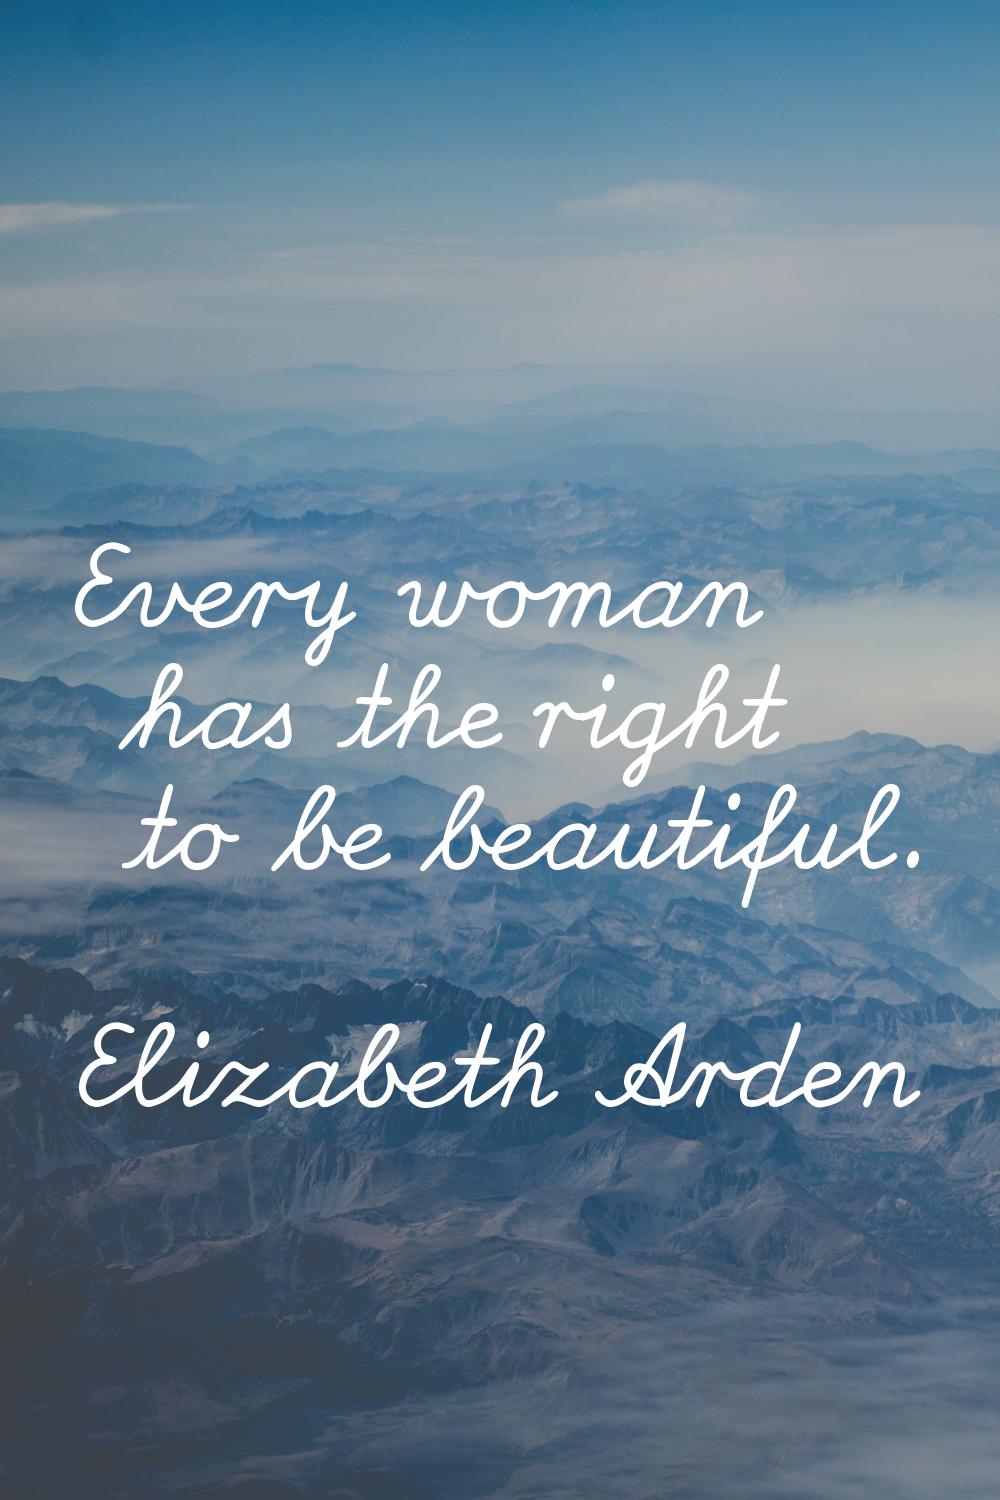 Every woman has the right to be beautiful.